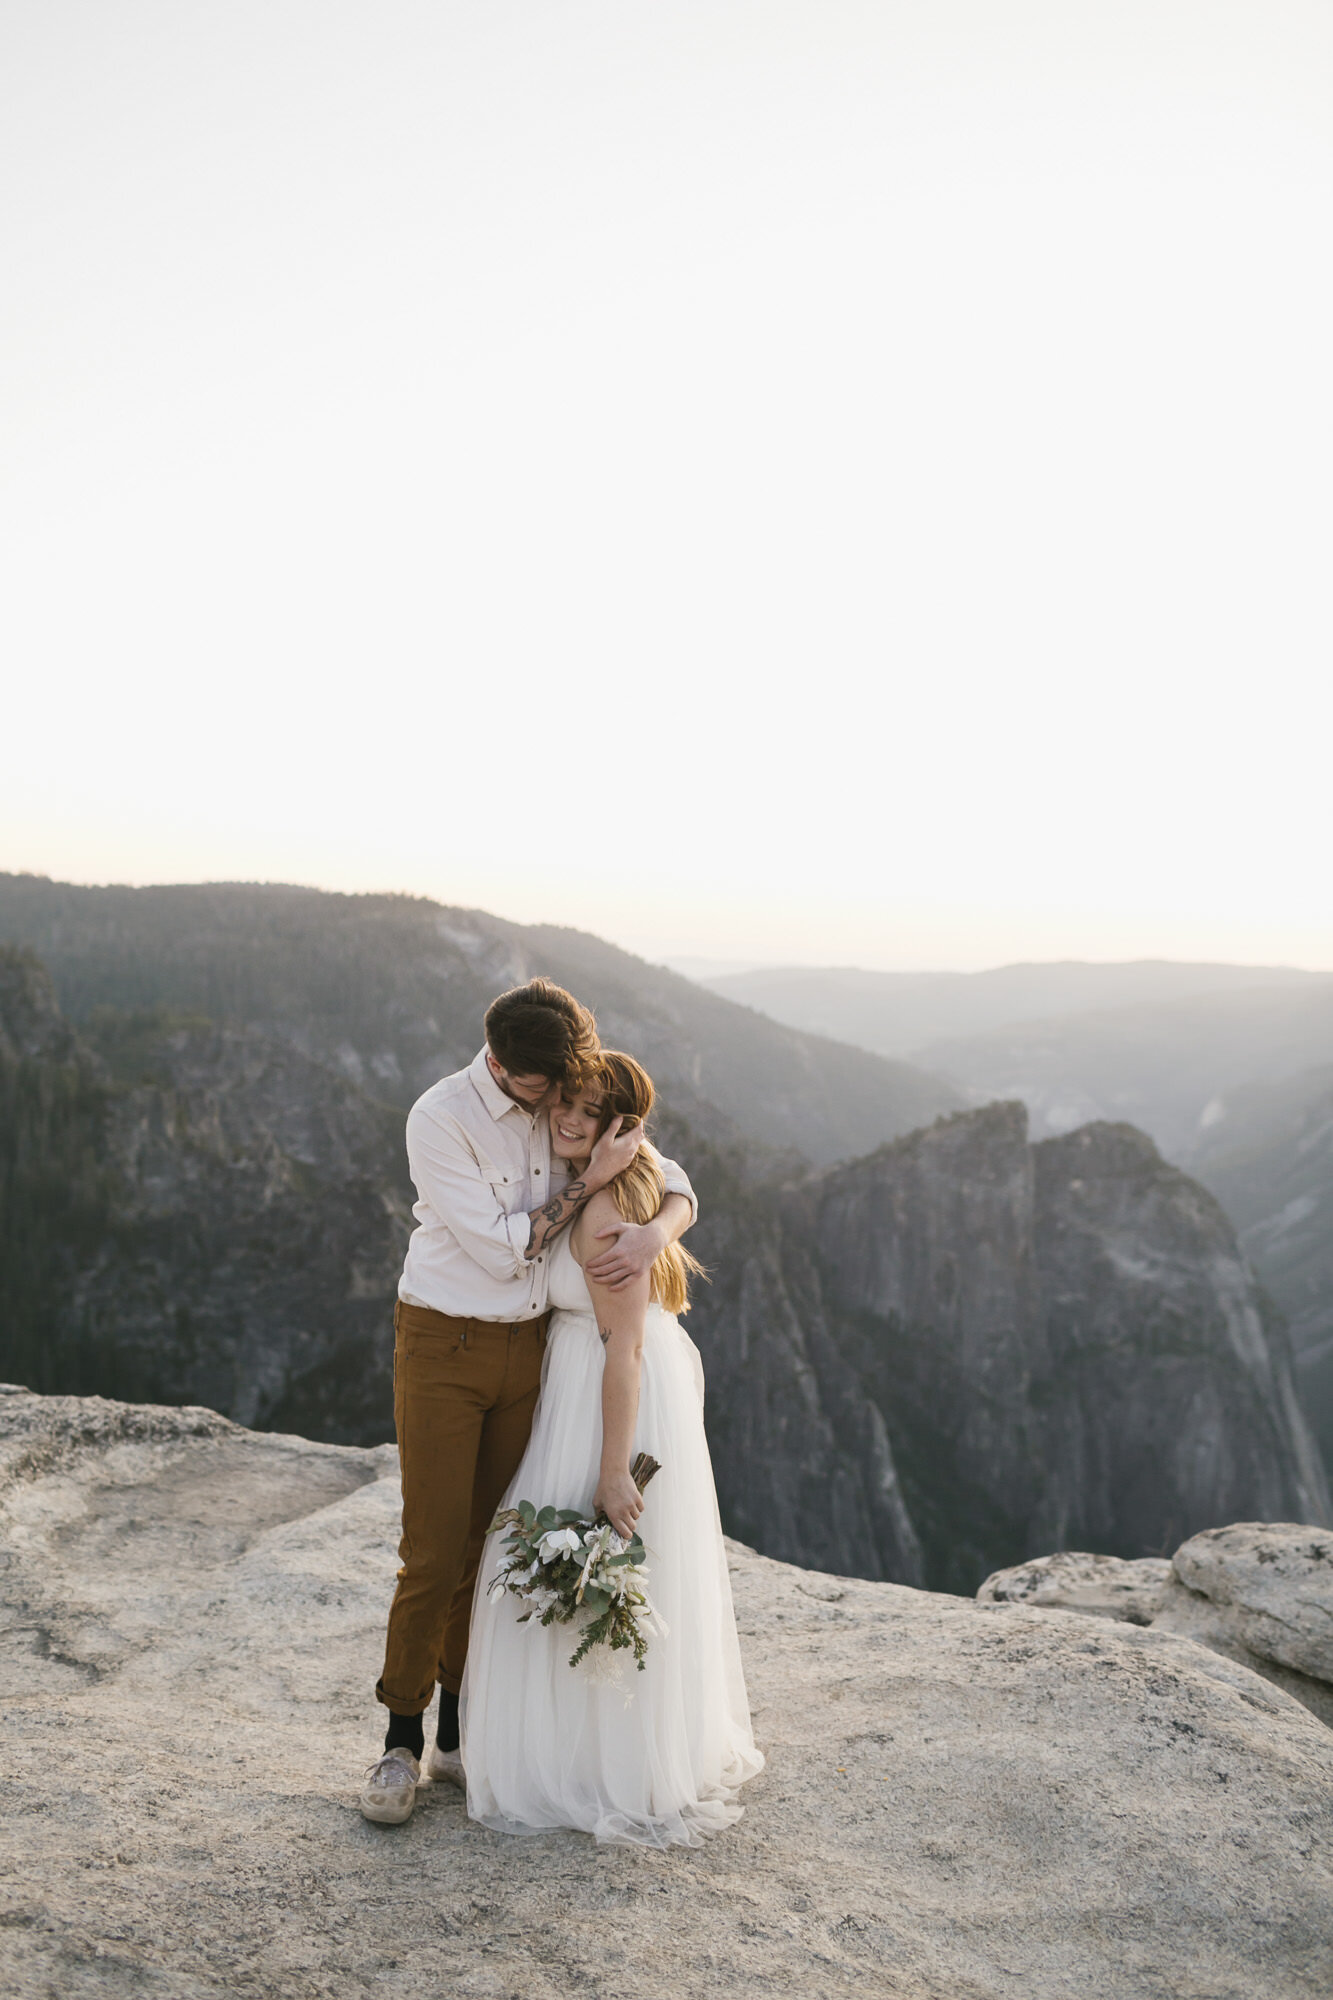 Wedding couple cuddle at Taft Point during their adventure elopement in Yosemite